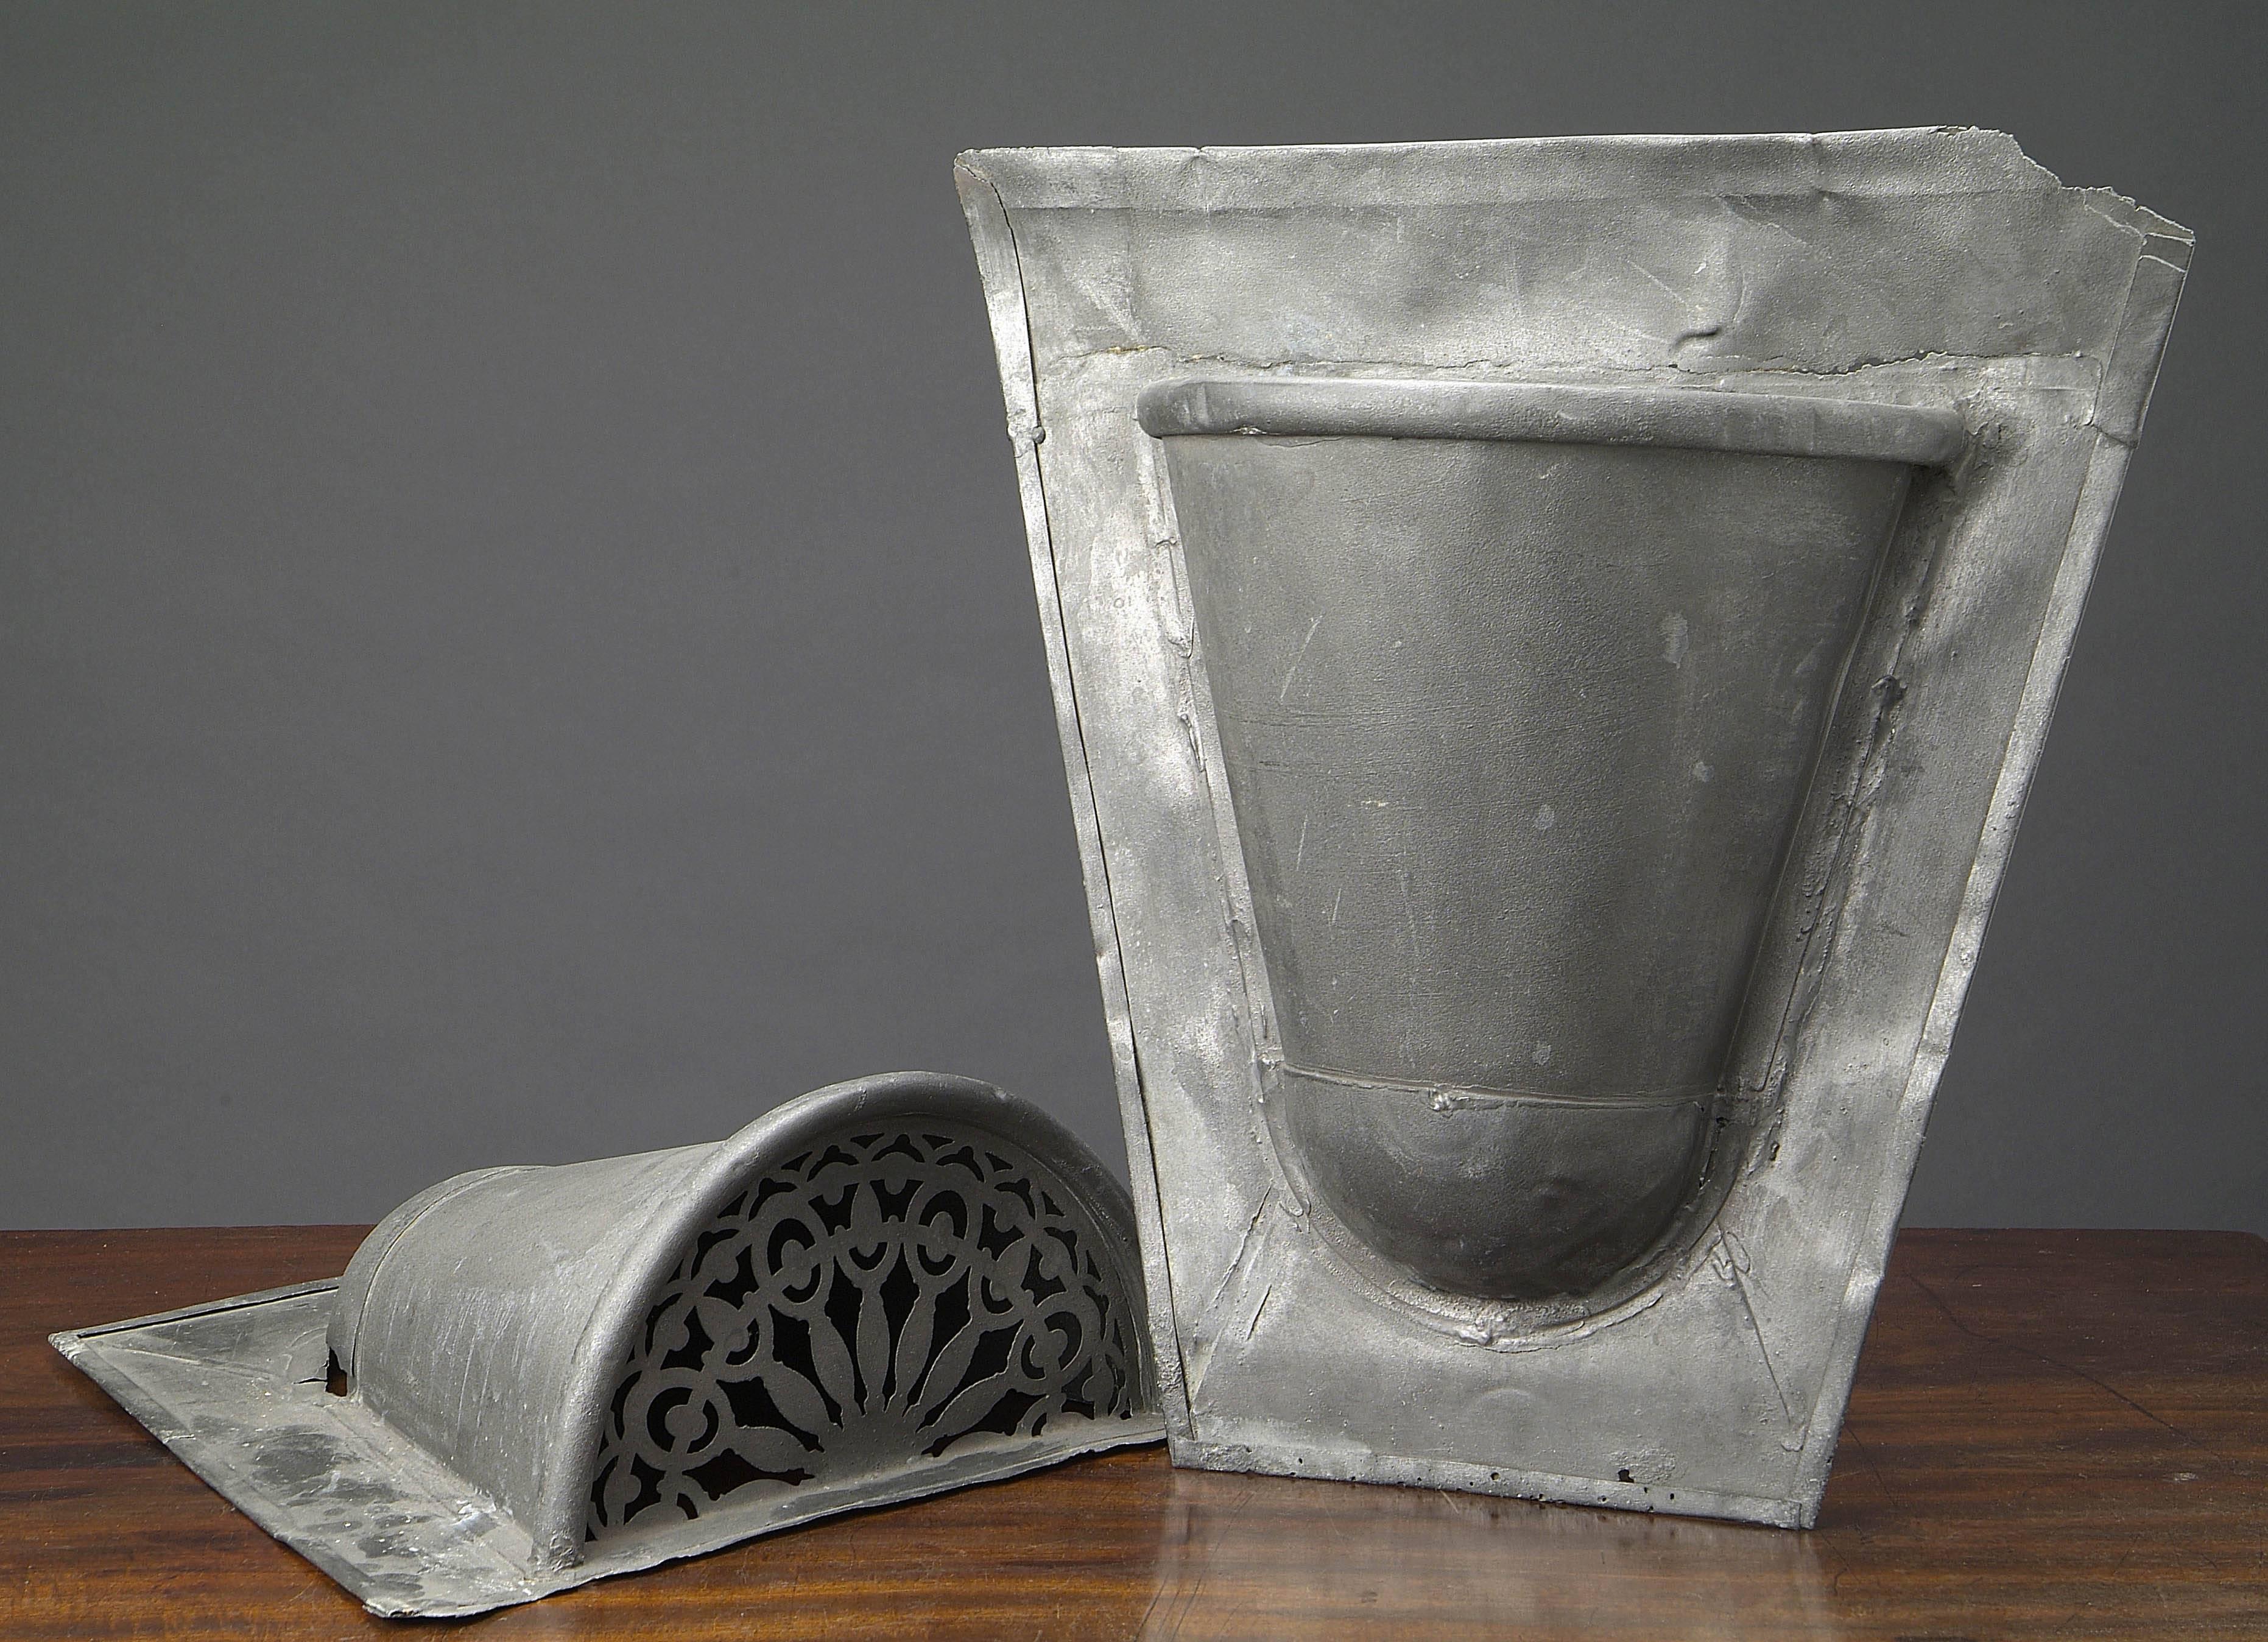 Rare pair of zinc ventilation apertures - ( in French chatières) cone shaped on trapezoid background - 
France, 19th century 
Dimensions: w.46 X d.14 X h.49 cm